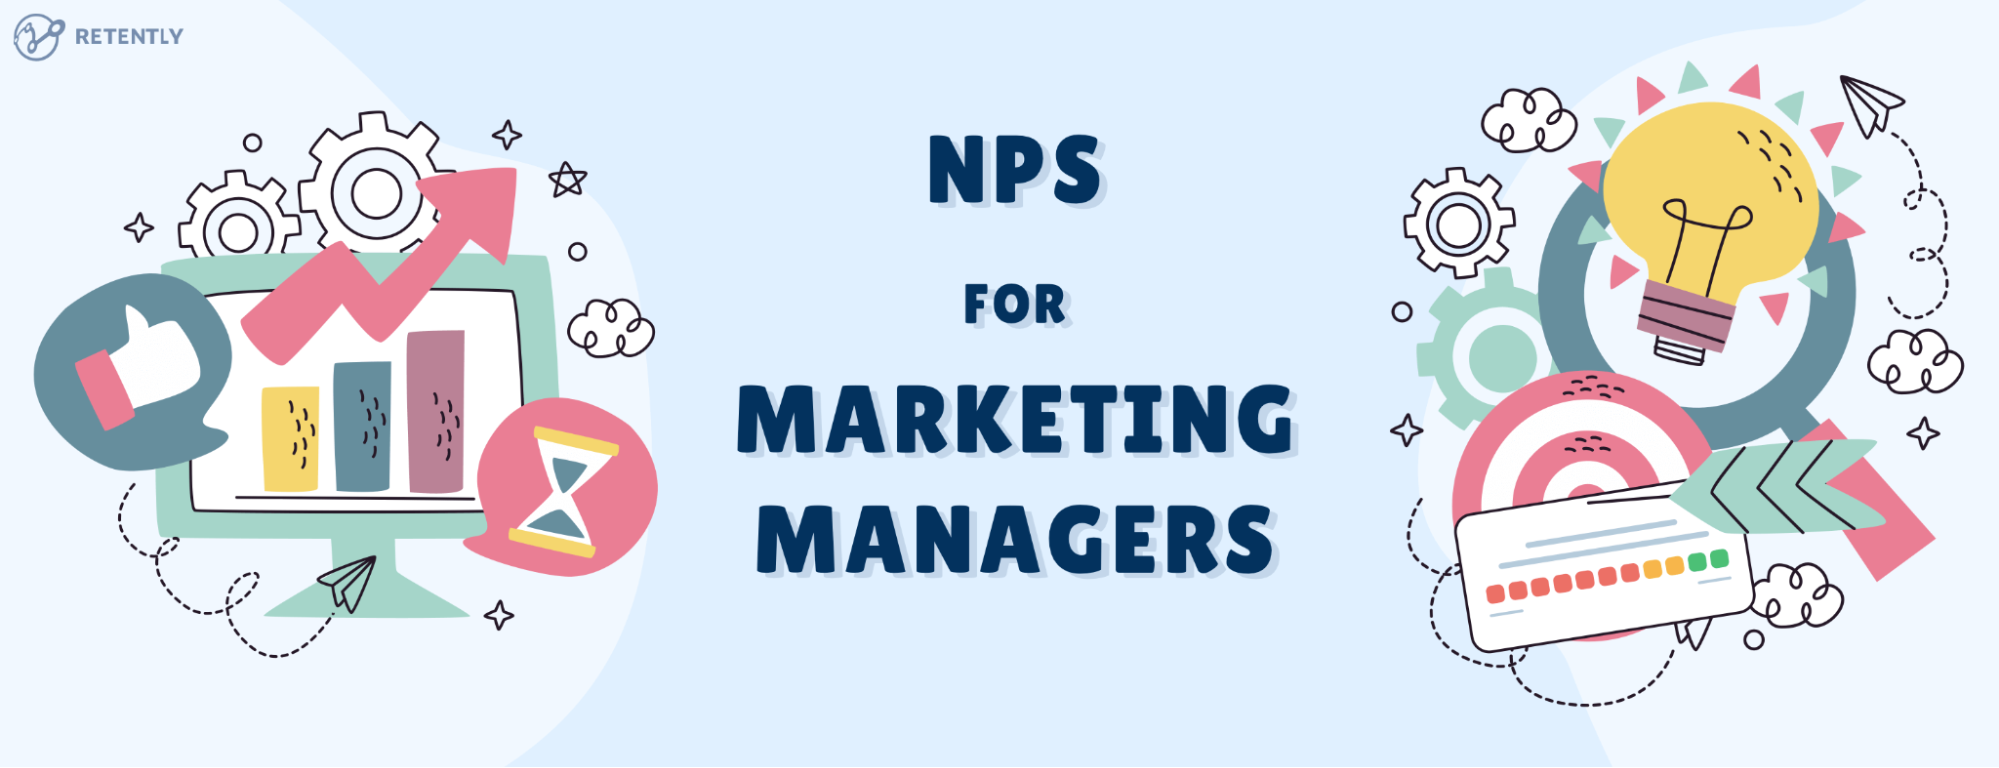 How Marketing Managers Can Benefit From NPS